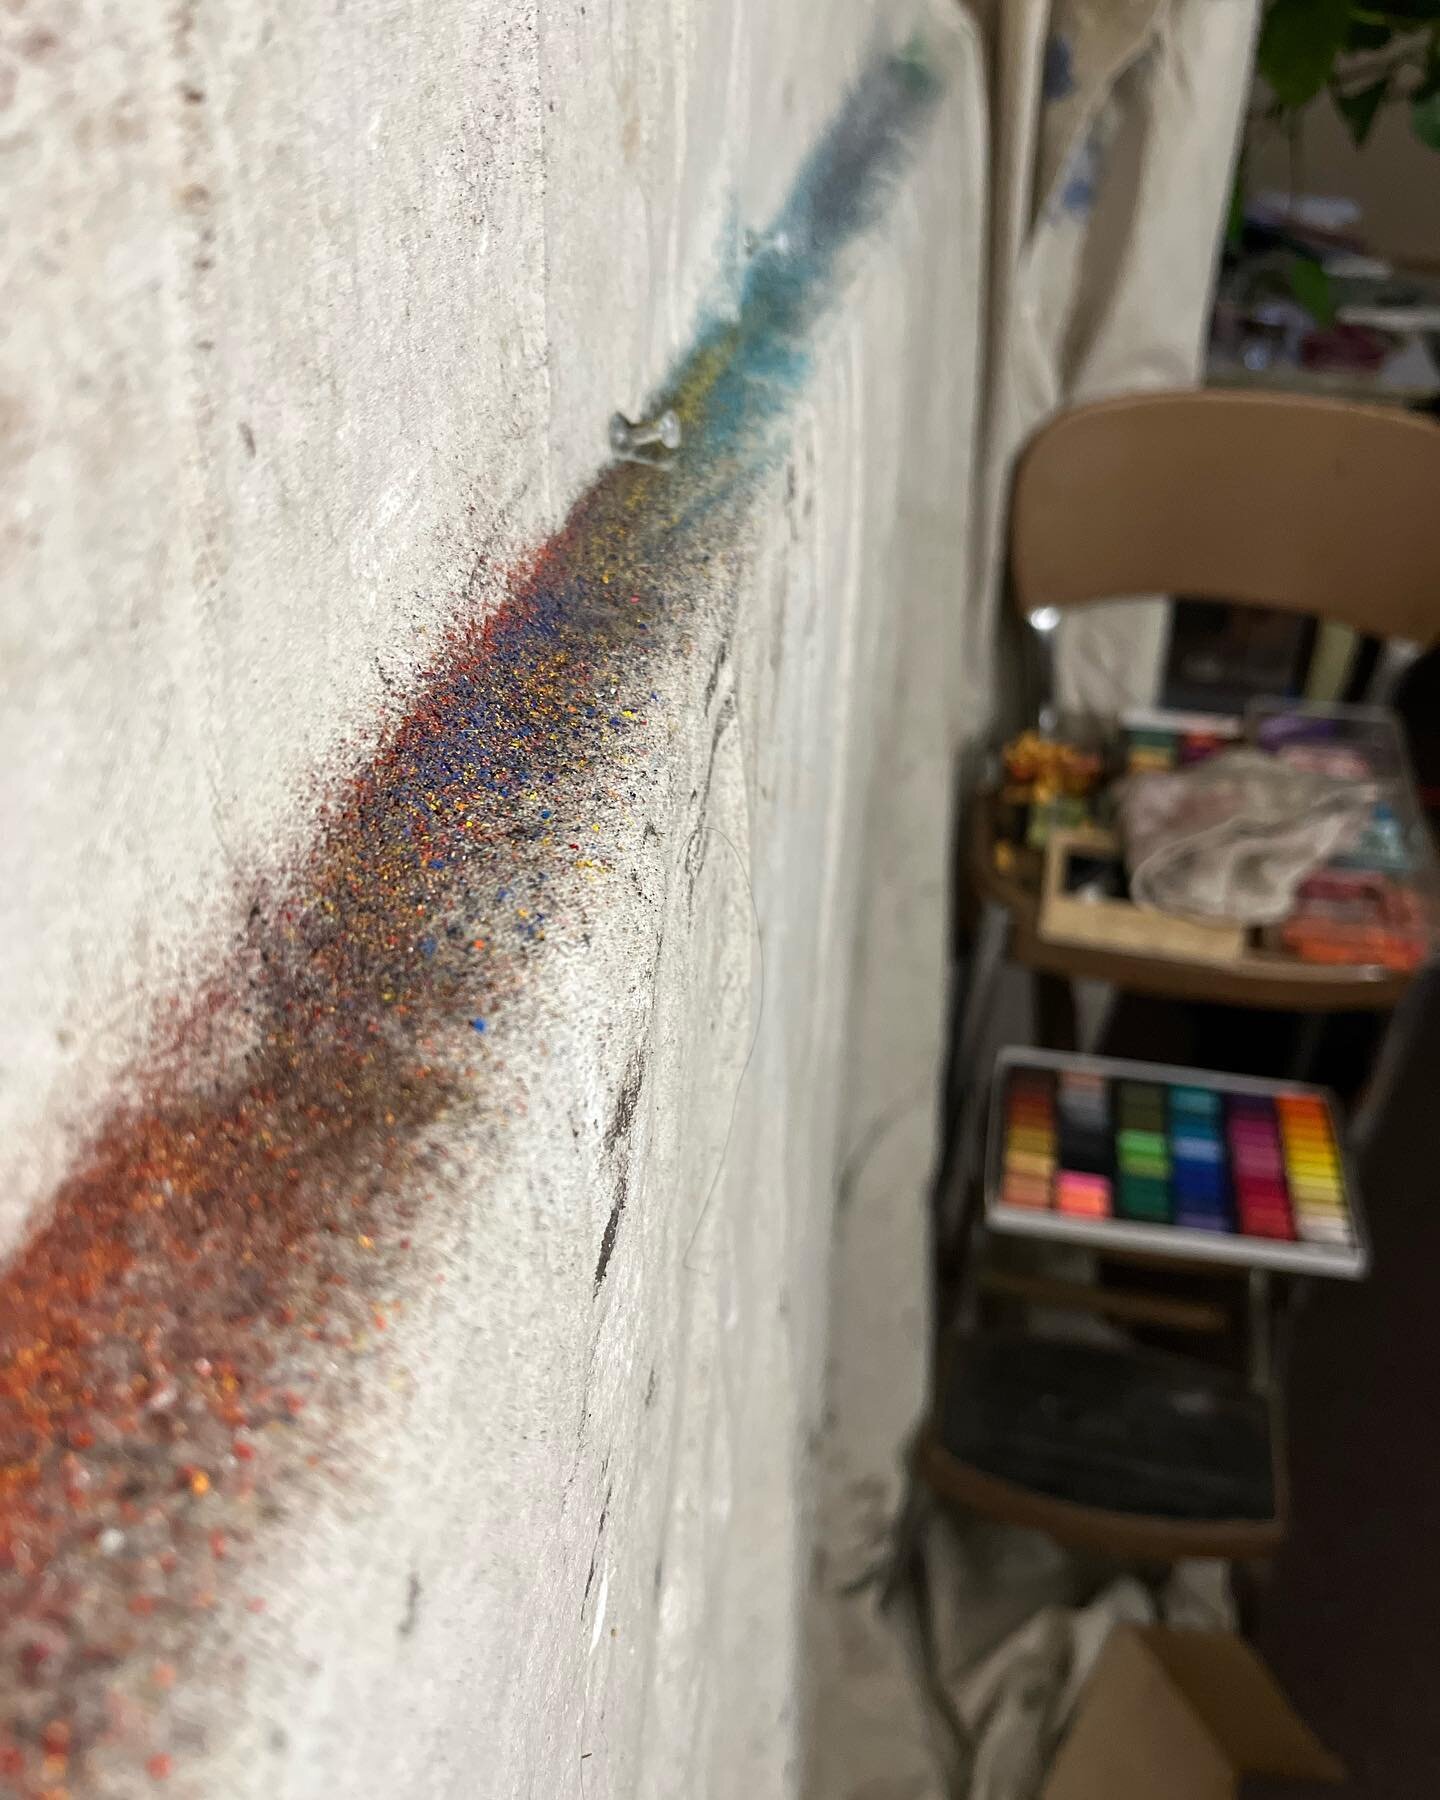 When midway through a drawing and I look down. All the grains of color that have fallen away.

#experimentsindrawing #pastel #sketches